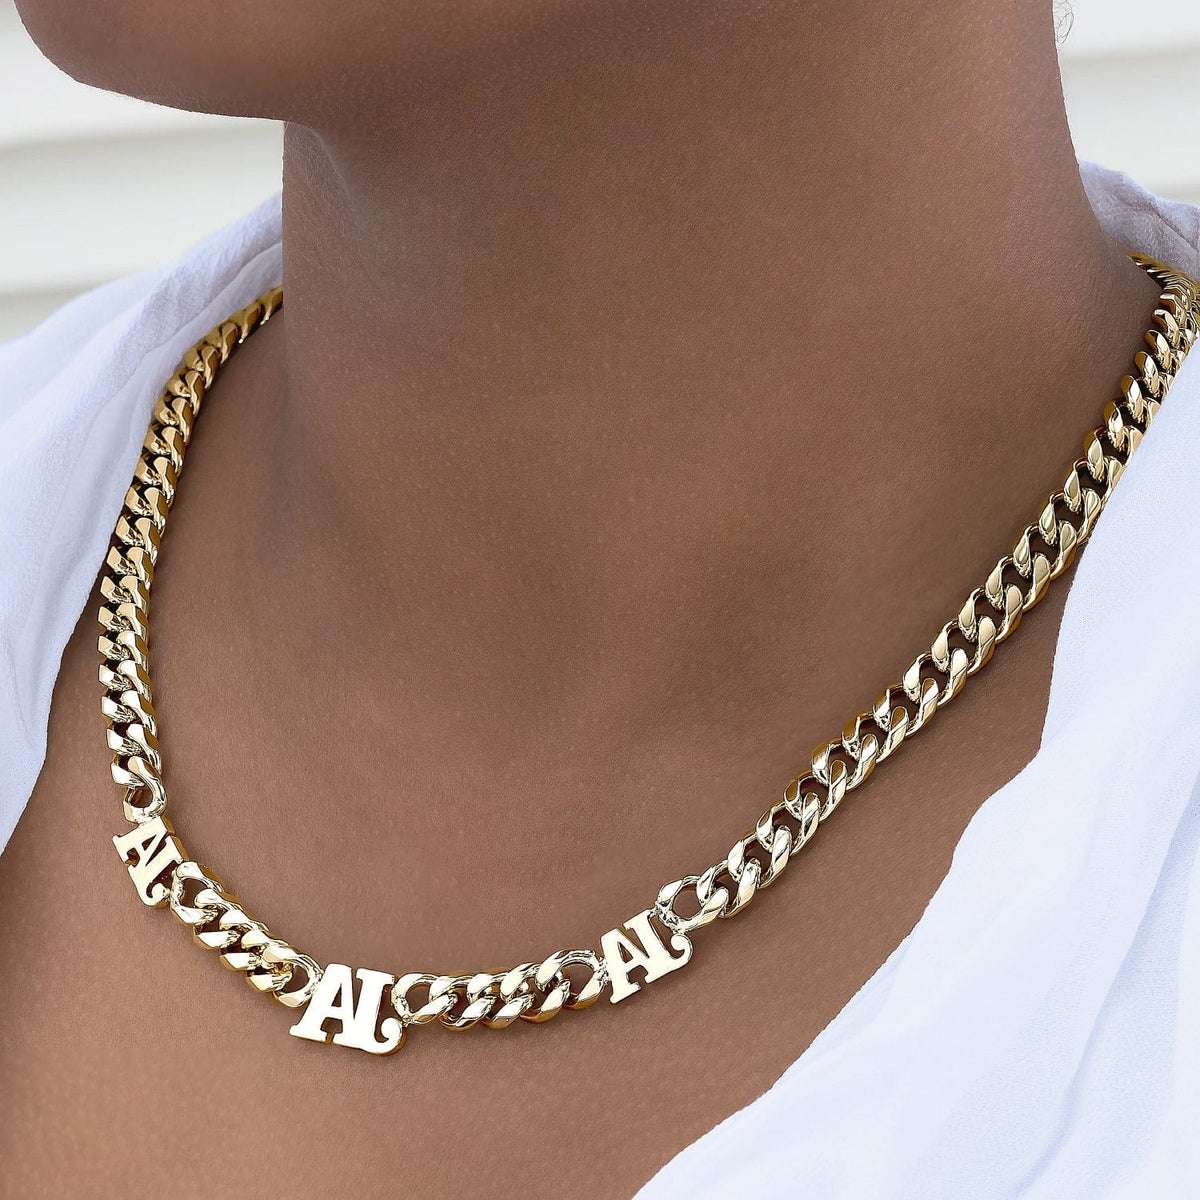 Gold tone stainless steel / Cuban chain / 9mm Stainless Steel Cuban Chain with 6 Initials Necklace